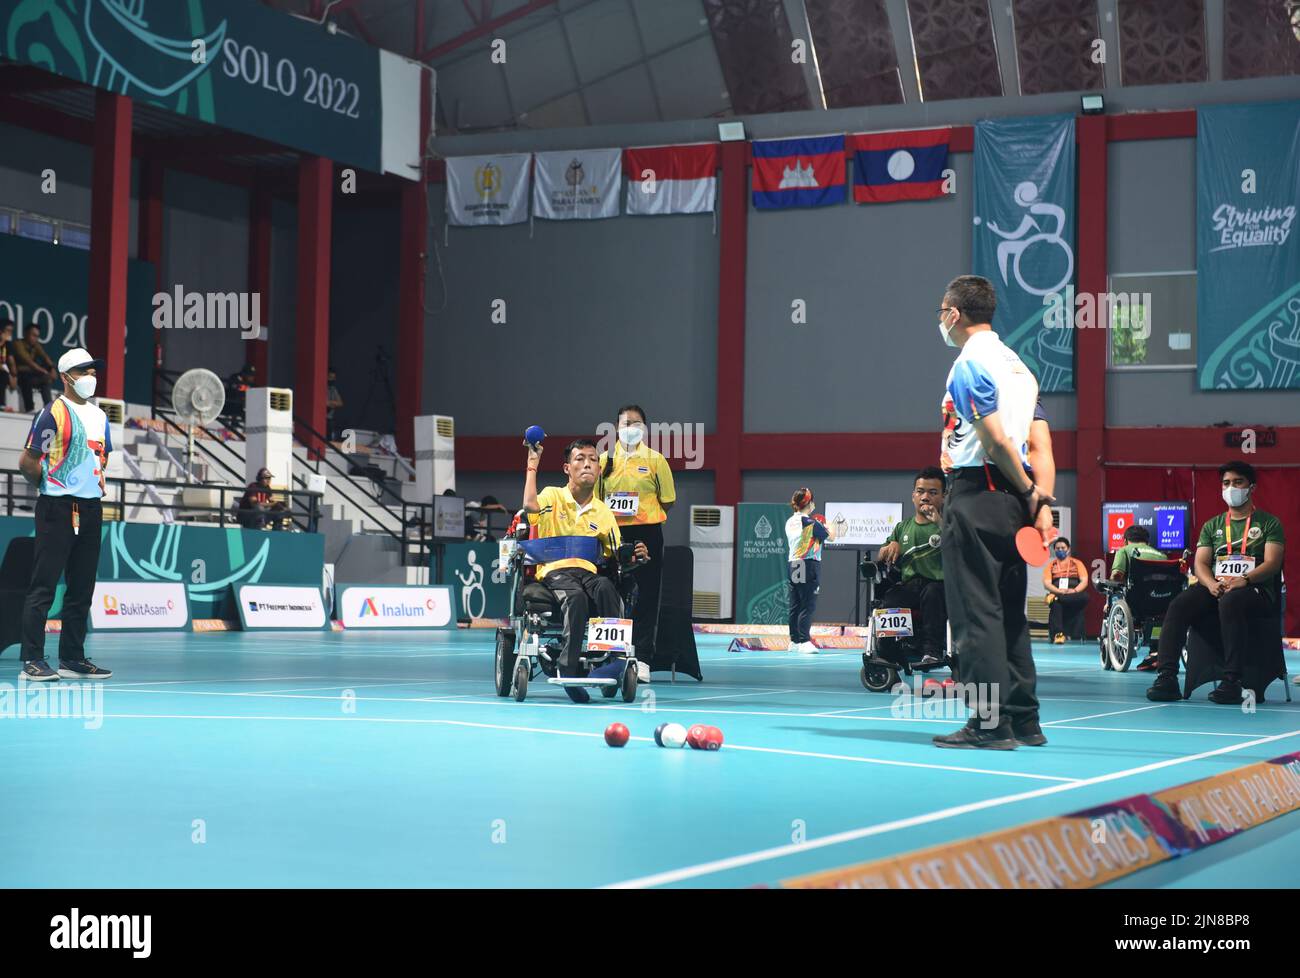 The 2022 ASEAN Para Games, officially known as the 11th ASEAN Para Games, and commonly known as Surakarta 2022, was a biannual multi-sport event for athletes with physical disabilities in Southeast Asia. It was held from 30th July to 6th August 2022. All 11 countries in the region participated. Surakarta, Indonesia. Stock Photo